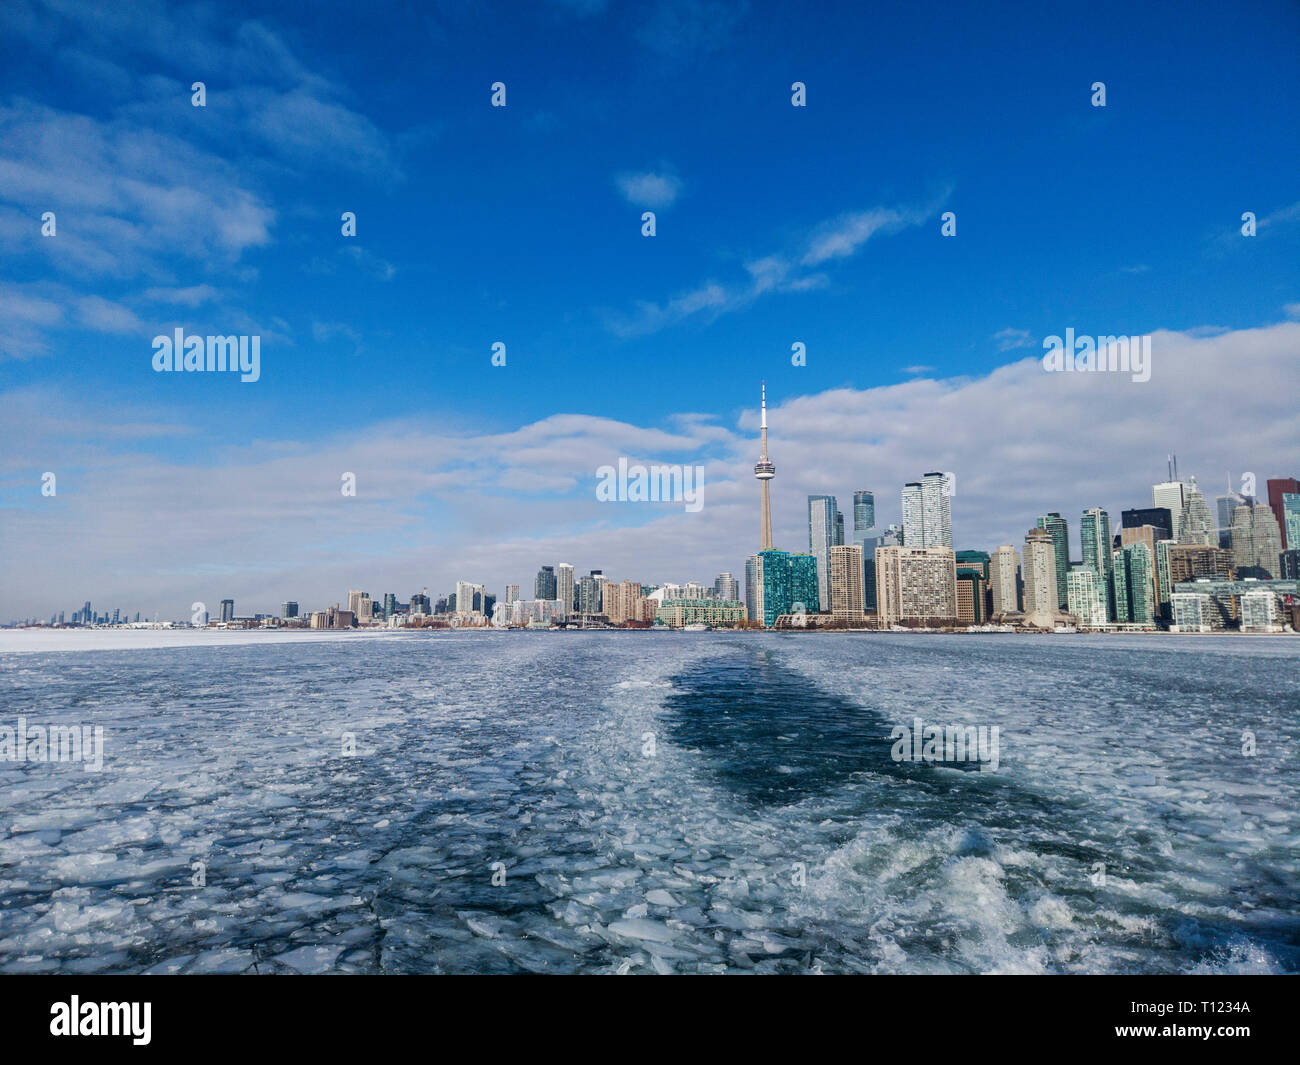 View of Toronto city skyline form a boat as it crosses the frozen Lake Ontario Stock Photo